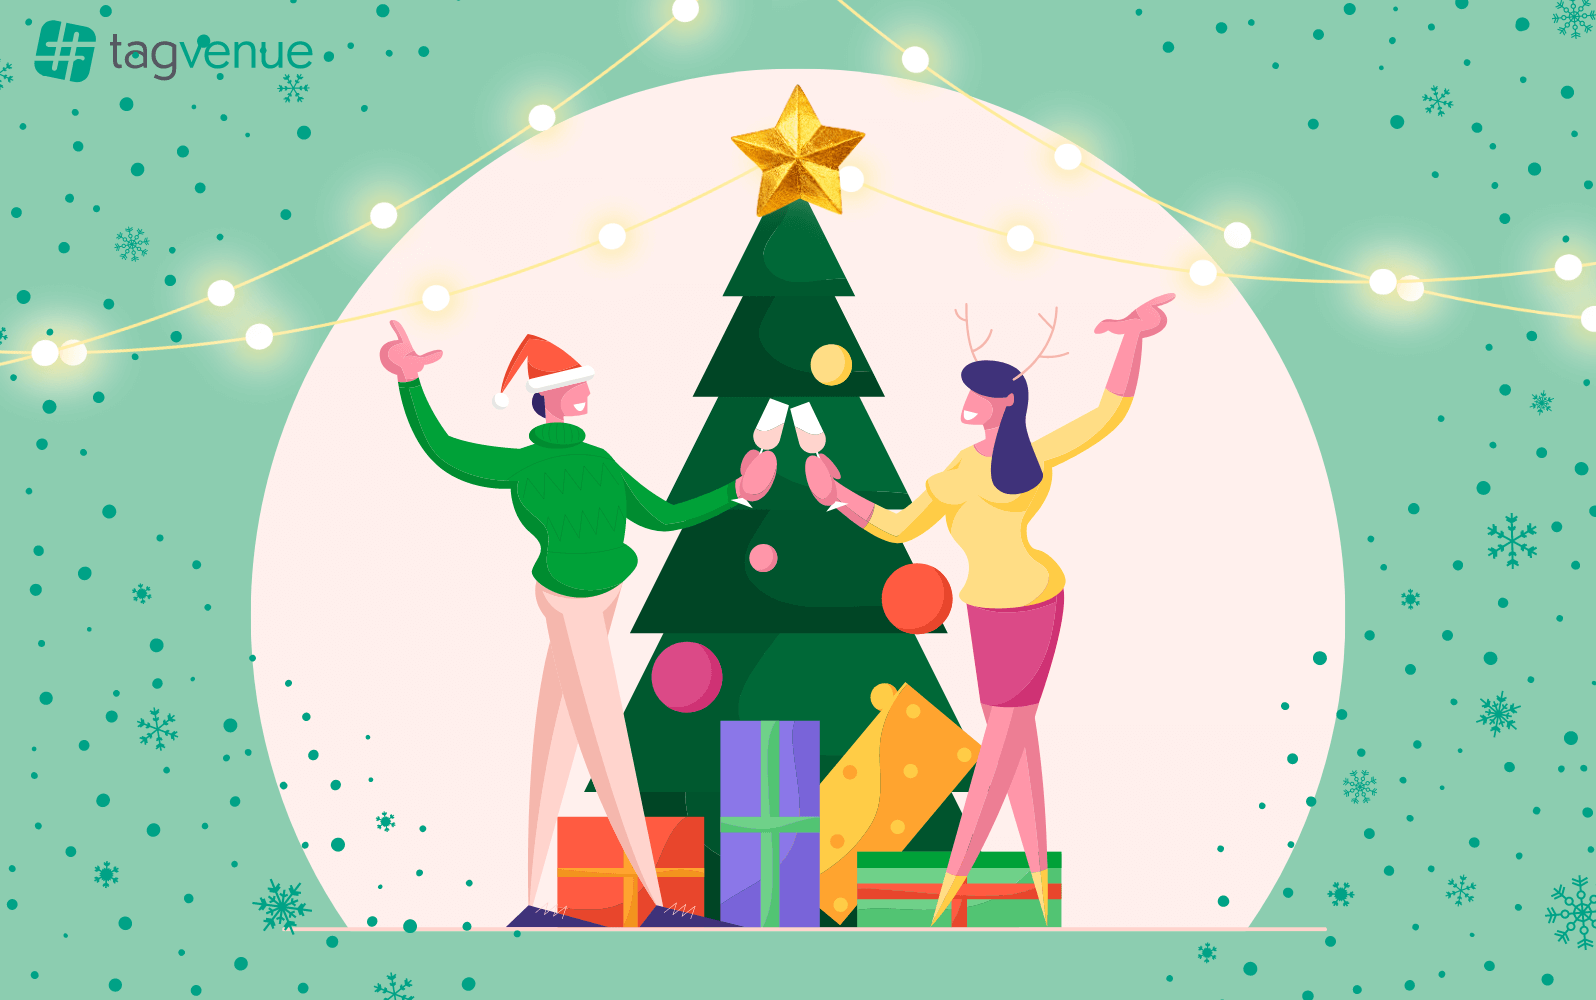 Office Christmas Party Planning: The Ultimate Guide